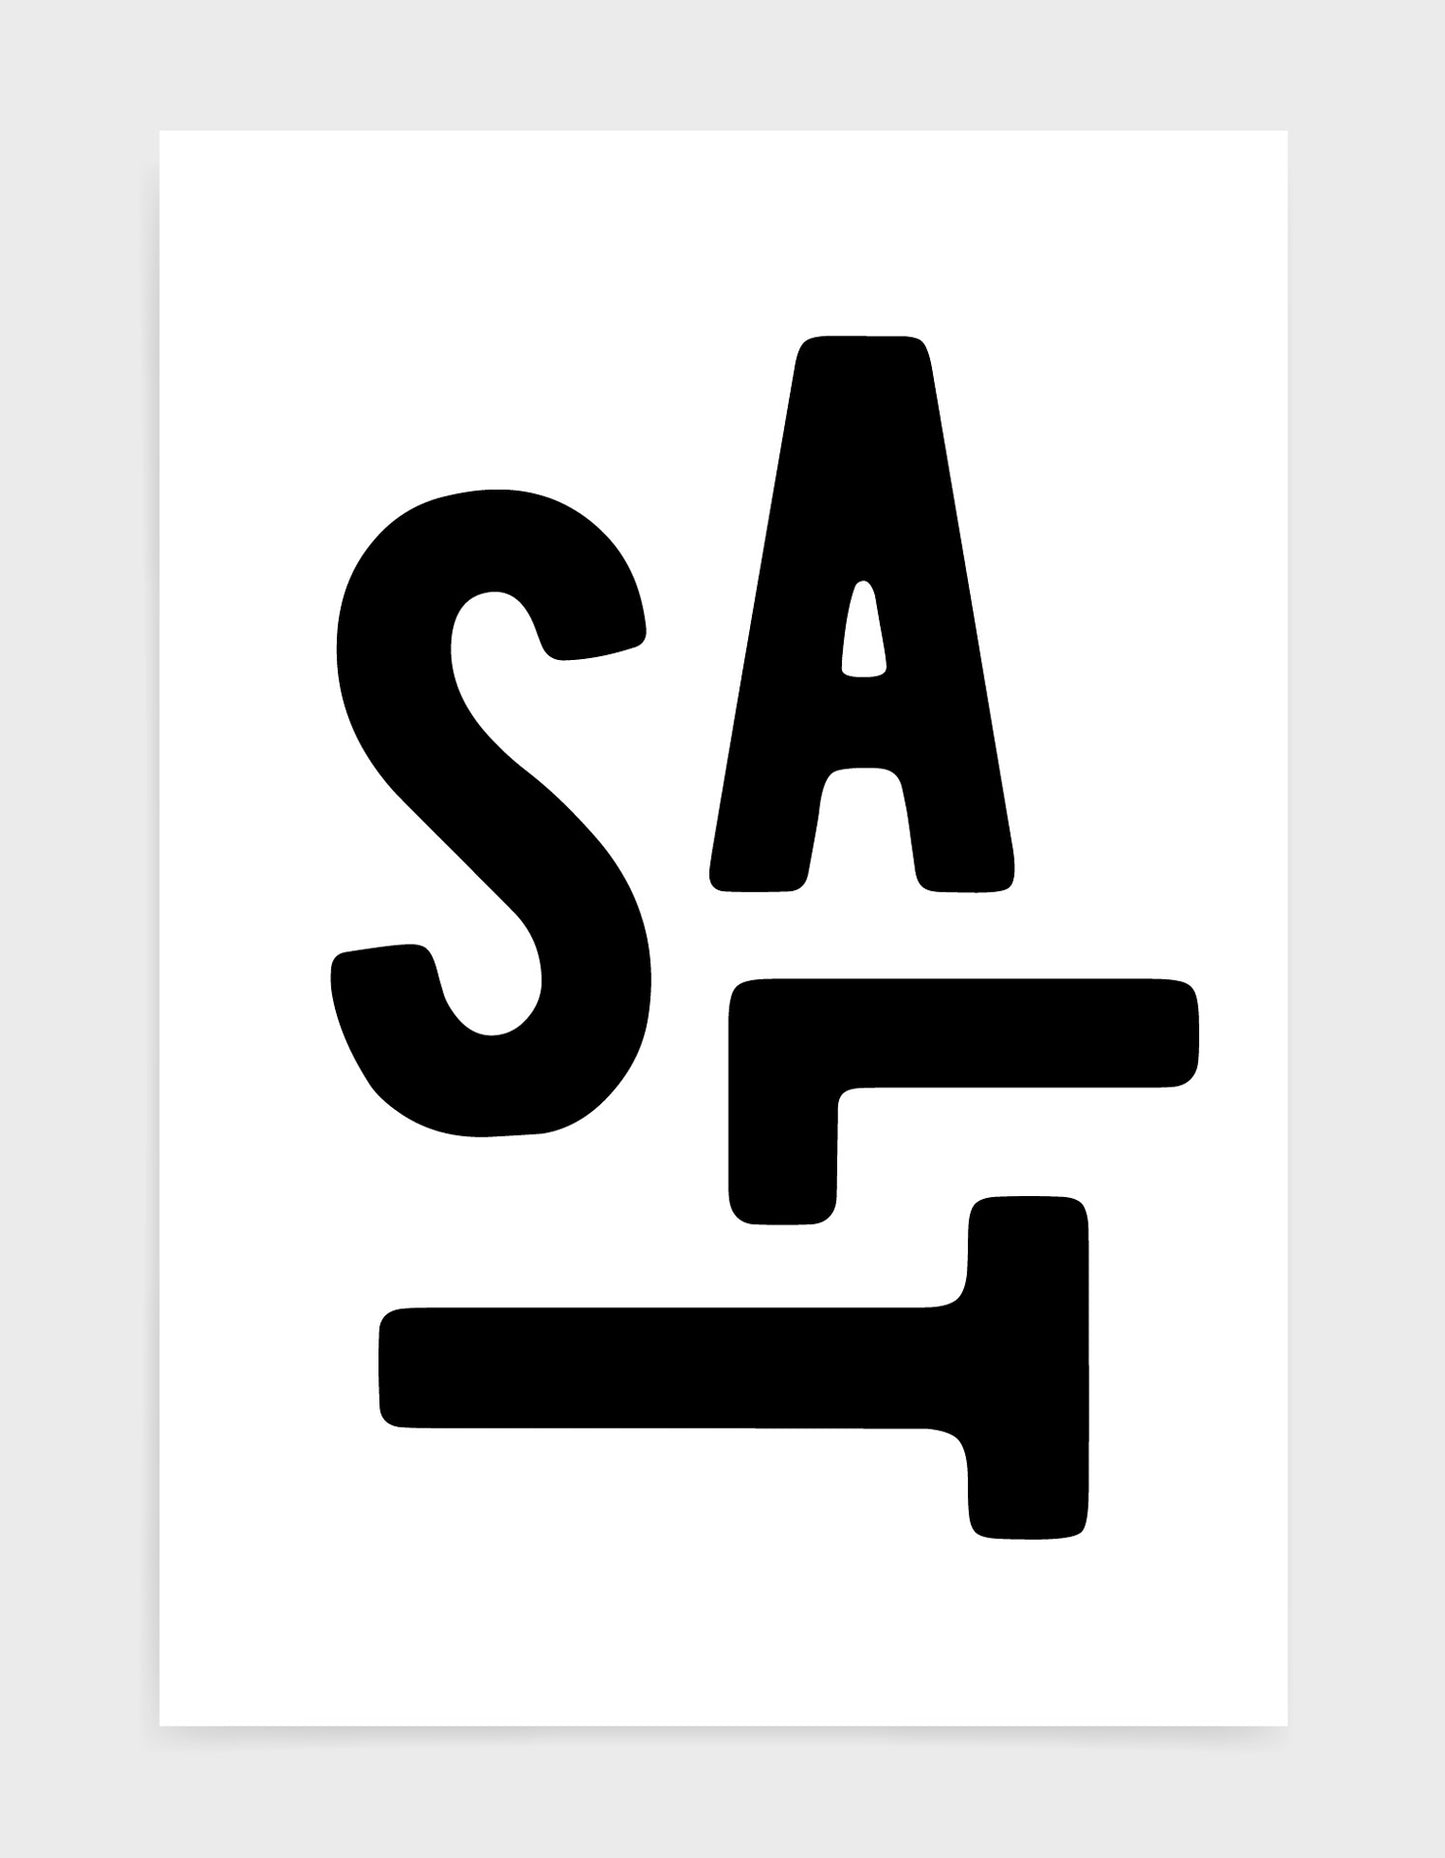 typography art print of the word salt in black text against a white background